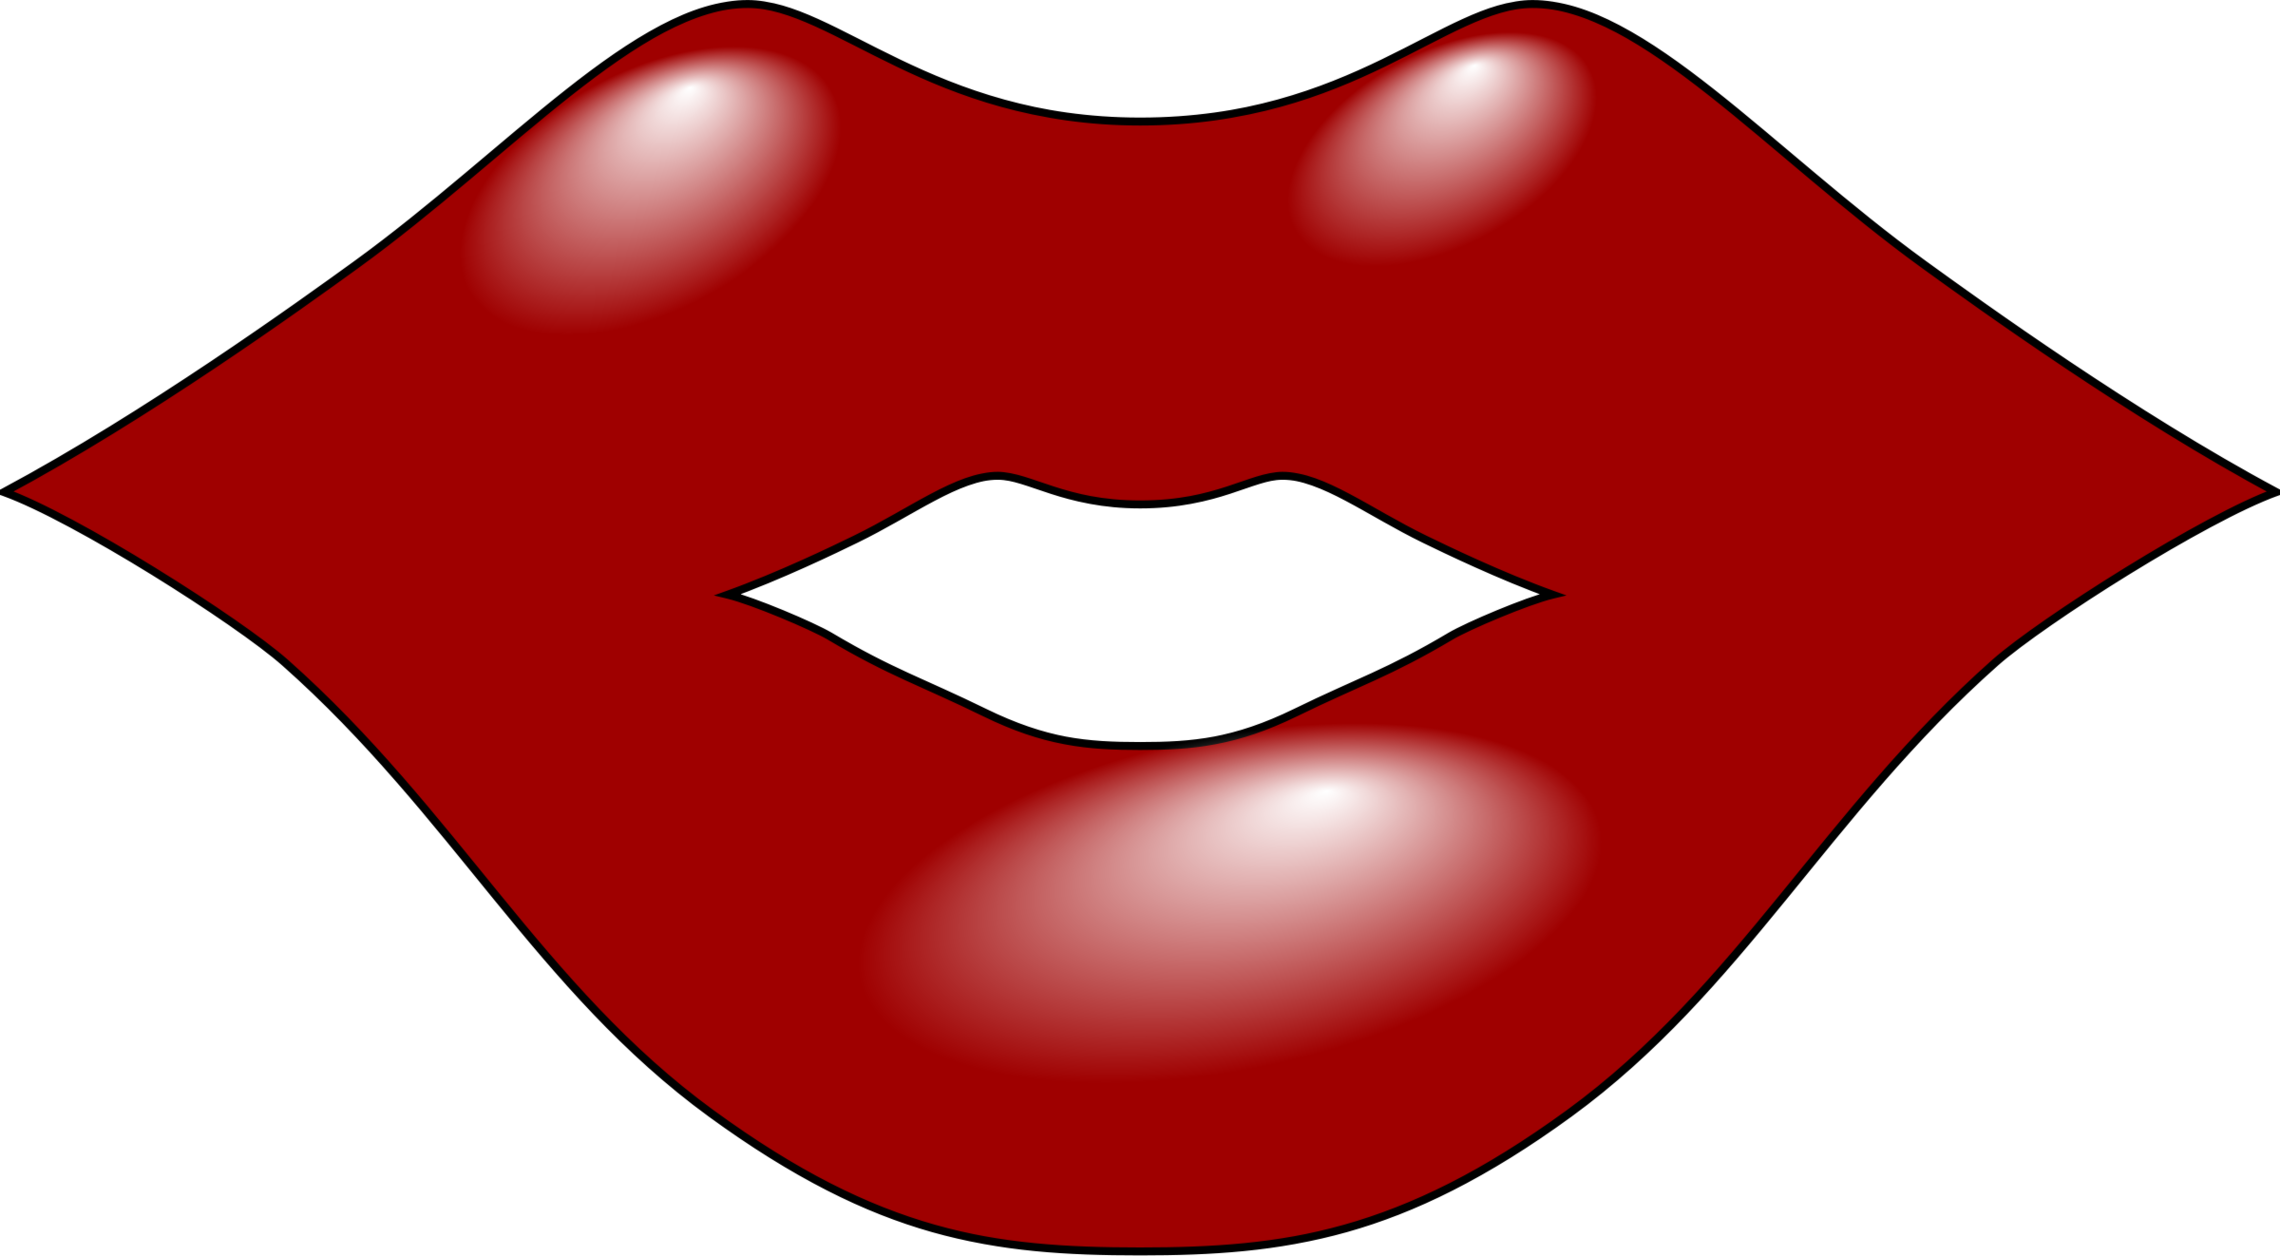 Mouth closed lips clip art